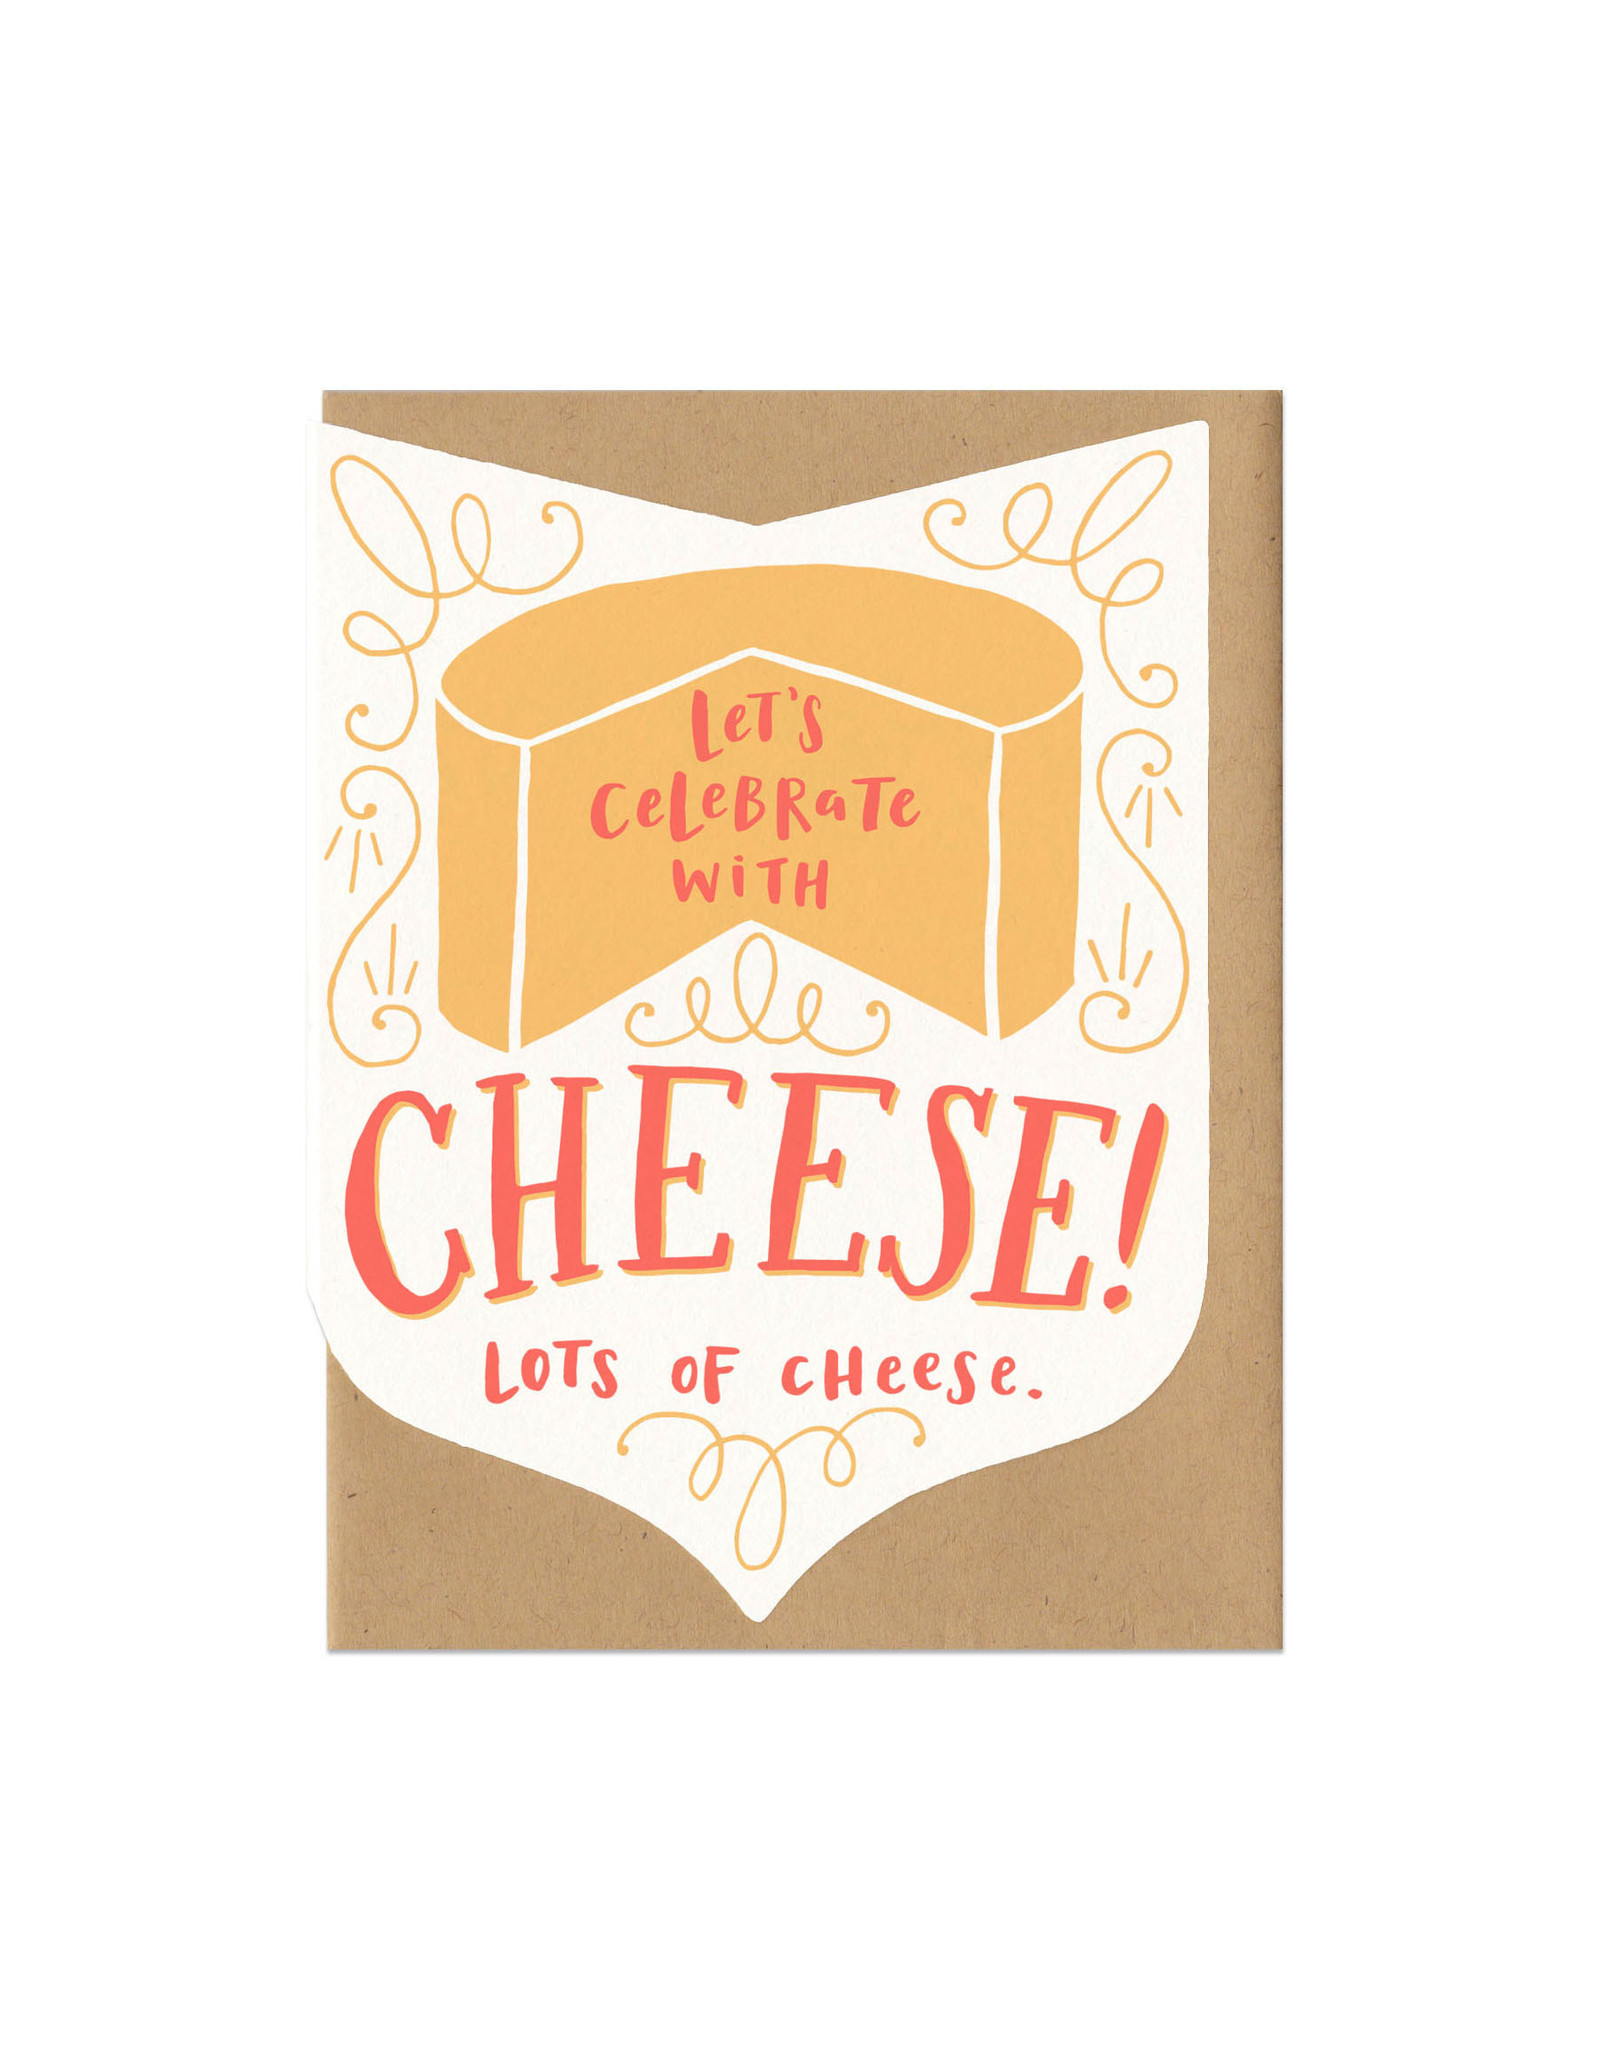 Let's Celebrate with Cheese.. (orange) Greeting Card